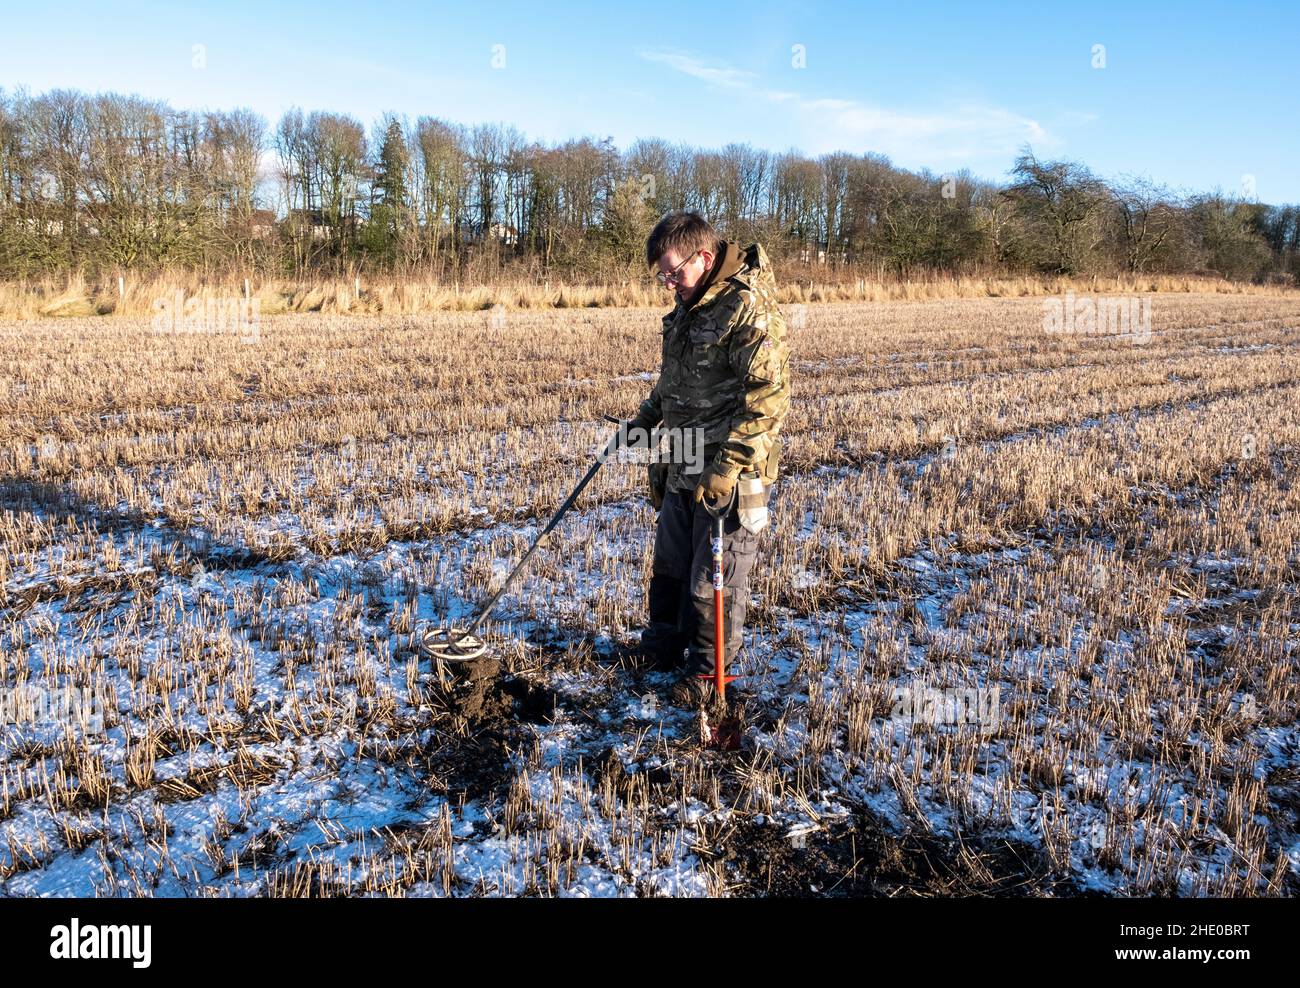 A man using metal detector to look for buried coins in a farmers field, West Lothian, Scotland. Stock Photo